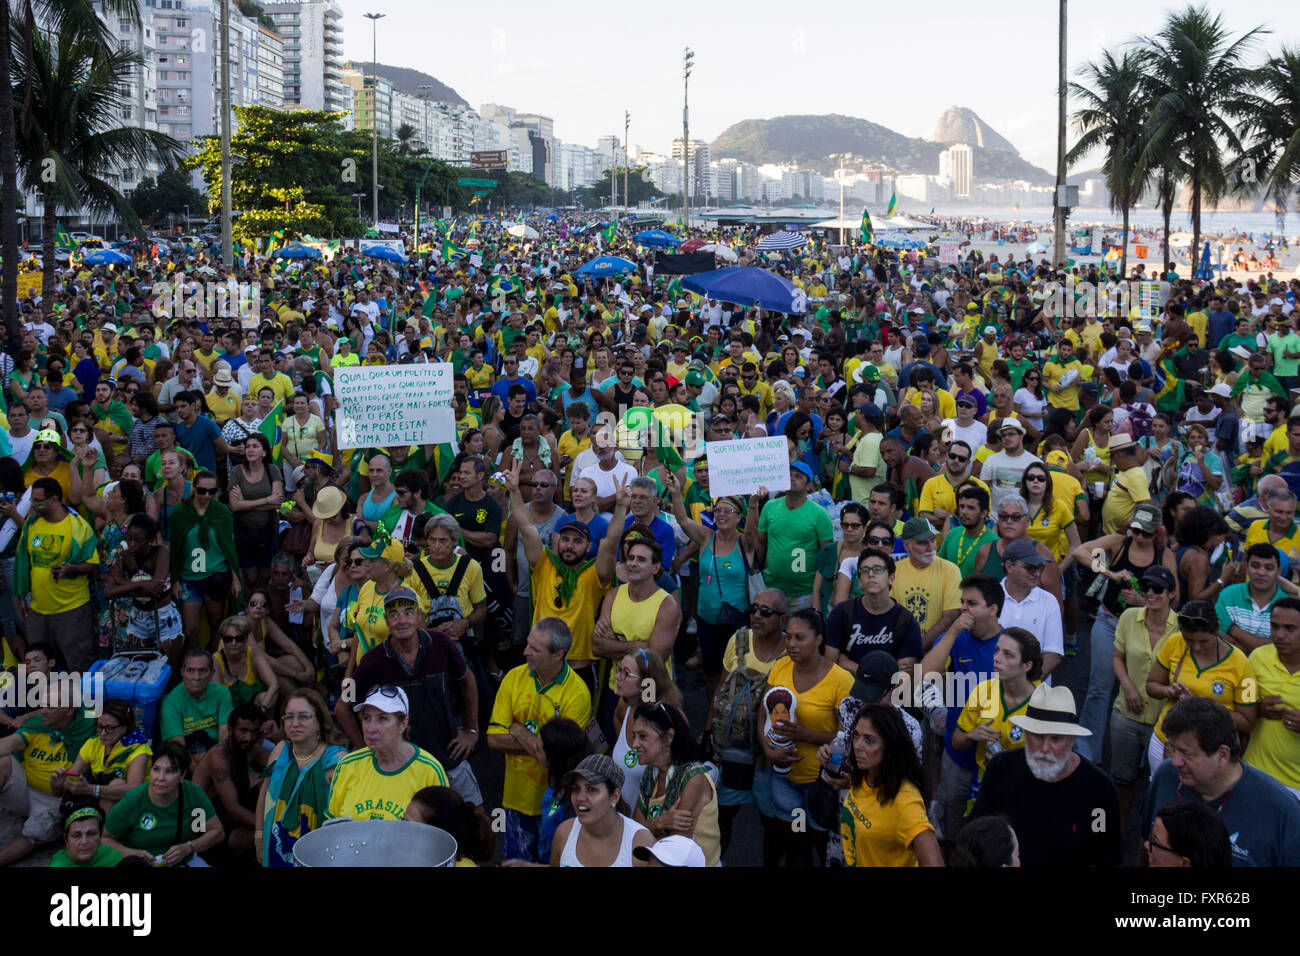 Rio de Janeiro, Brazil, 17 April 2016: Thousands of demonstrators protesting in favor of impeachment of Rousseff in Copacabana. This day is being voted on by deputies to be open the impeachment process to oust President Dilma Rousseff. Credit:  Luiz Souza/Alamy Live News Stock Photo